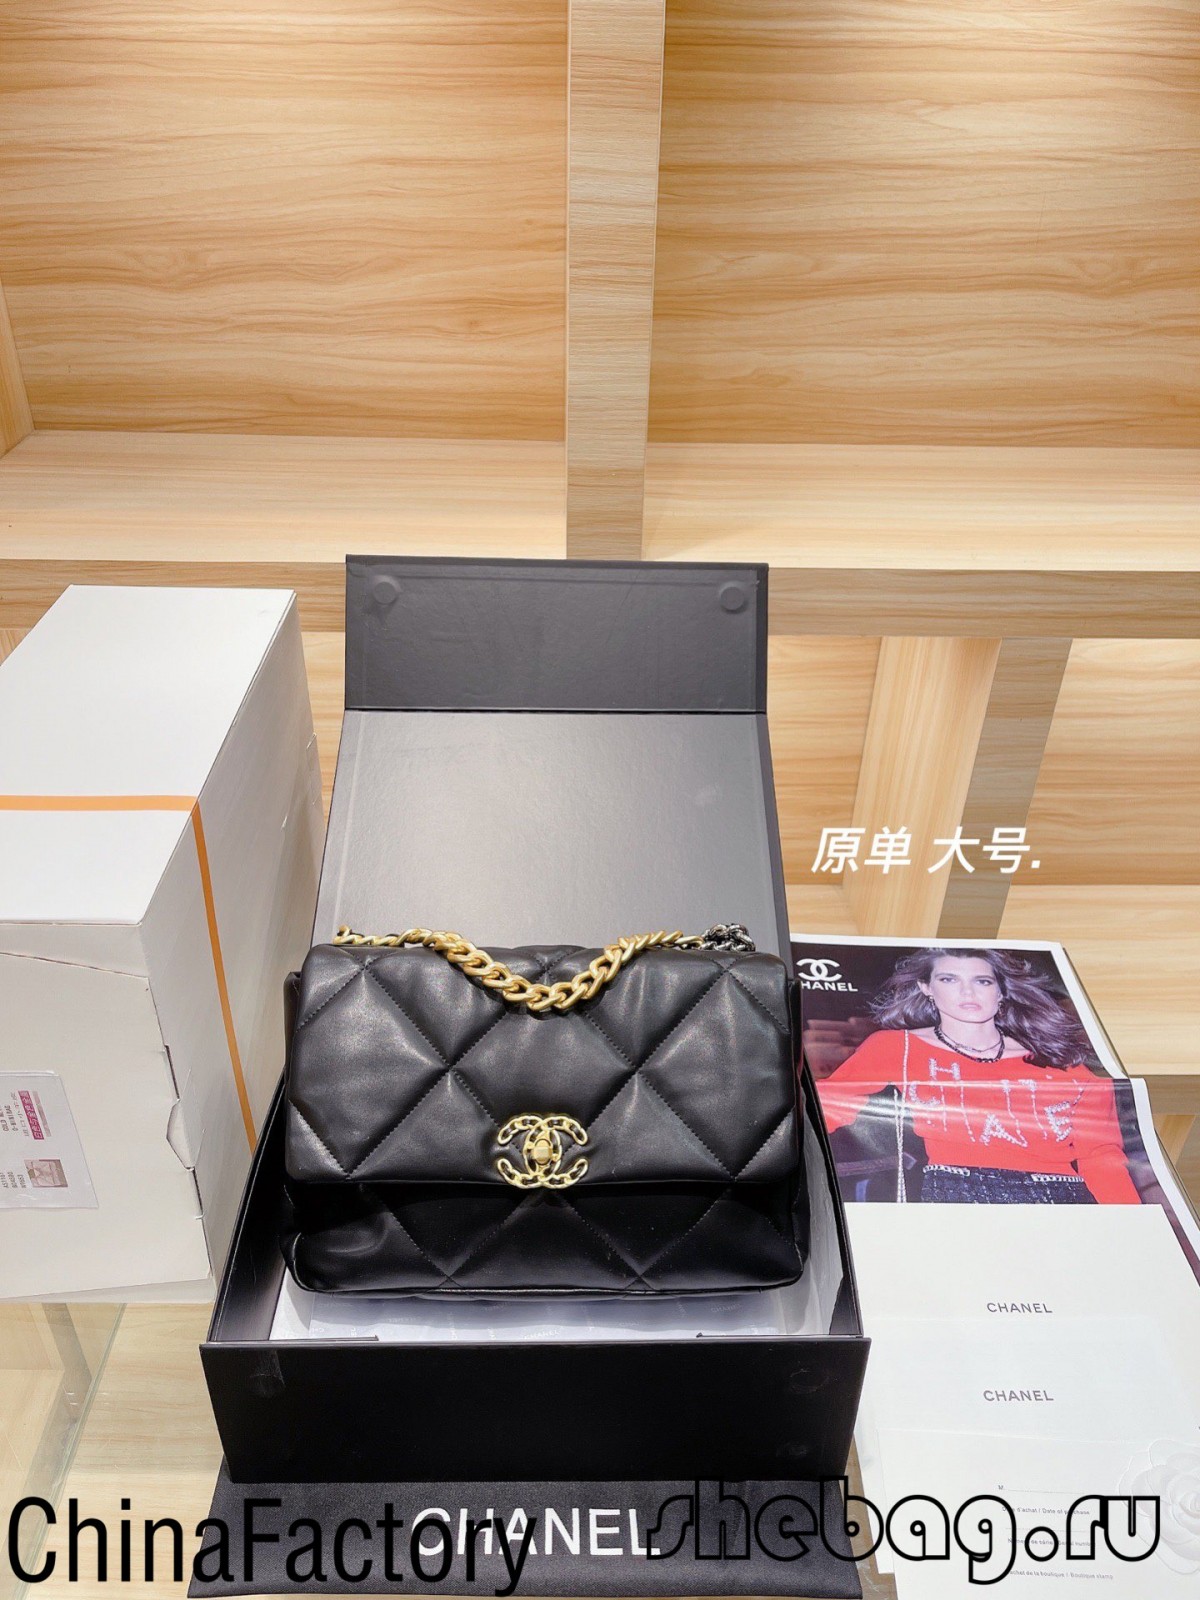 Aaa Chanel bag replica: Chanel 19 replica bag review (Updated in 2022)-Best Quality Fake Louis Vuitton Bag Online Store, Replica designer bag ru